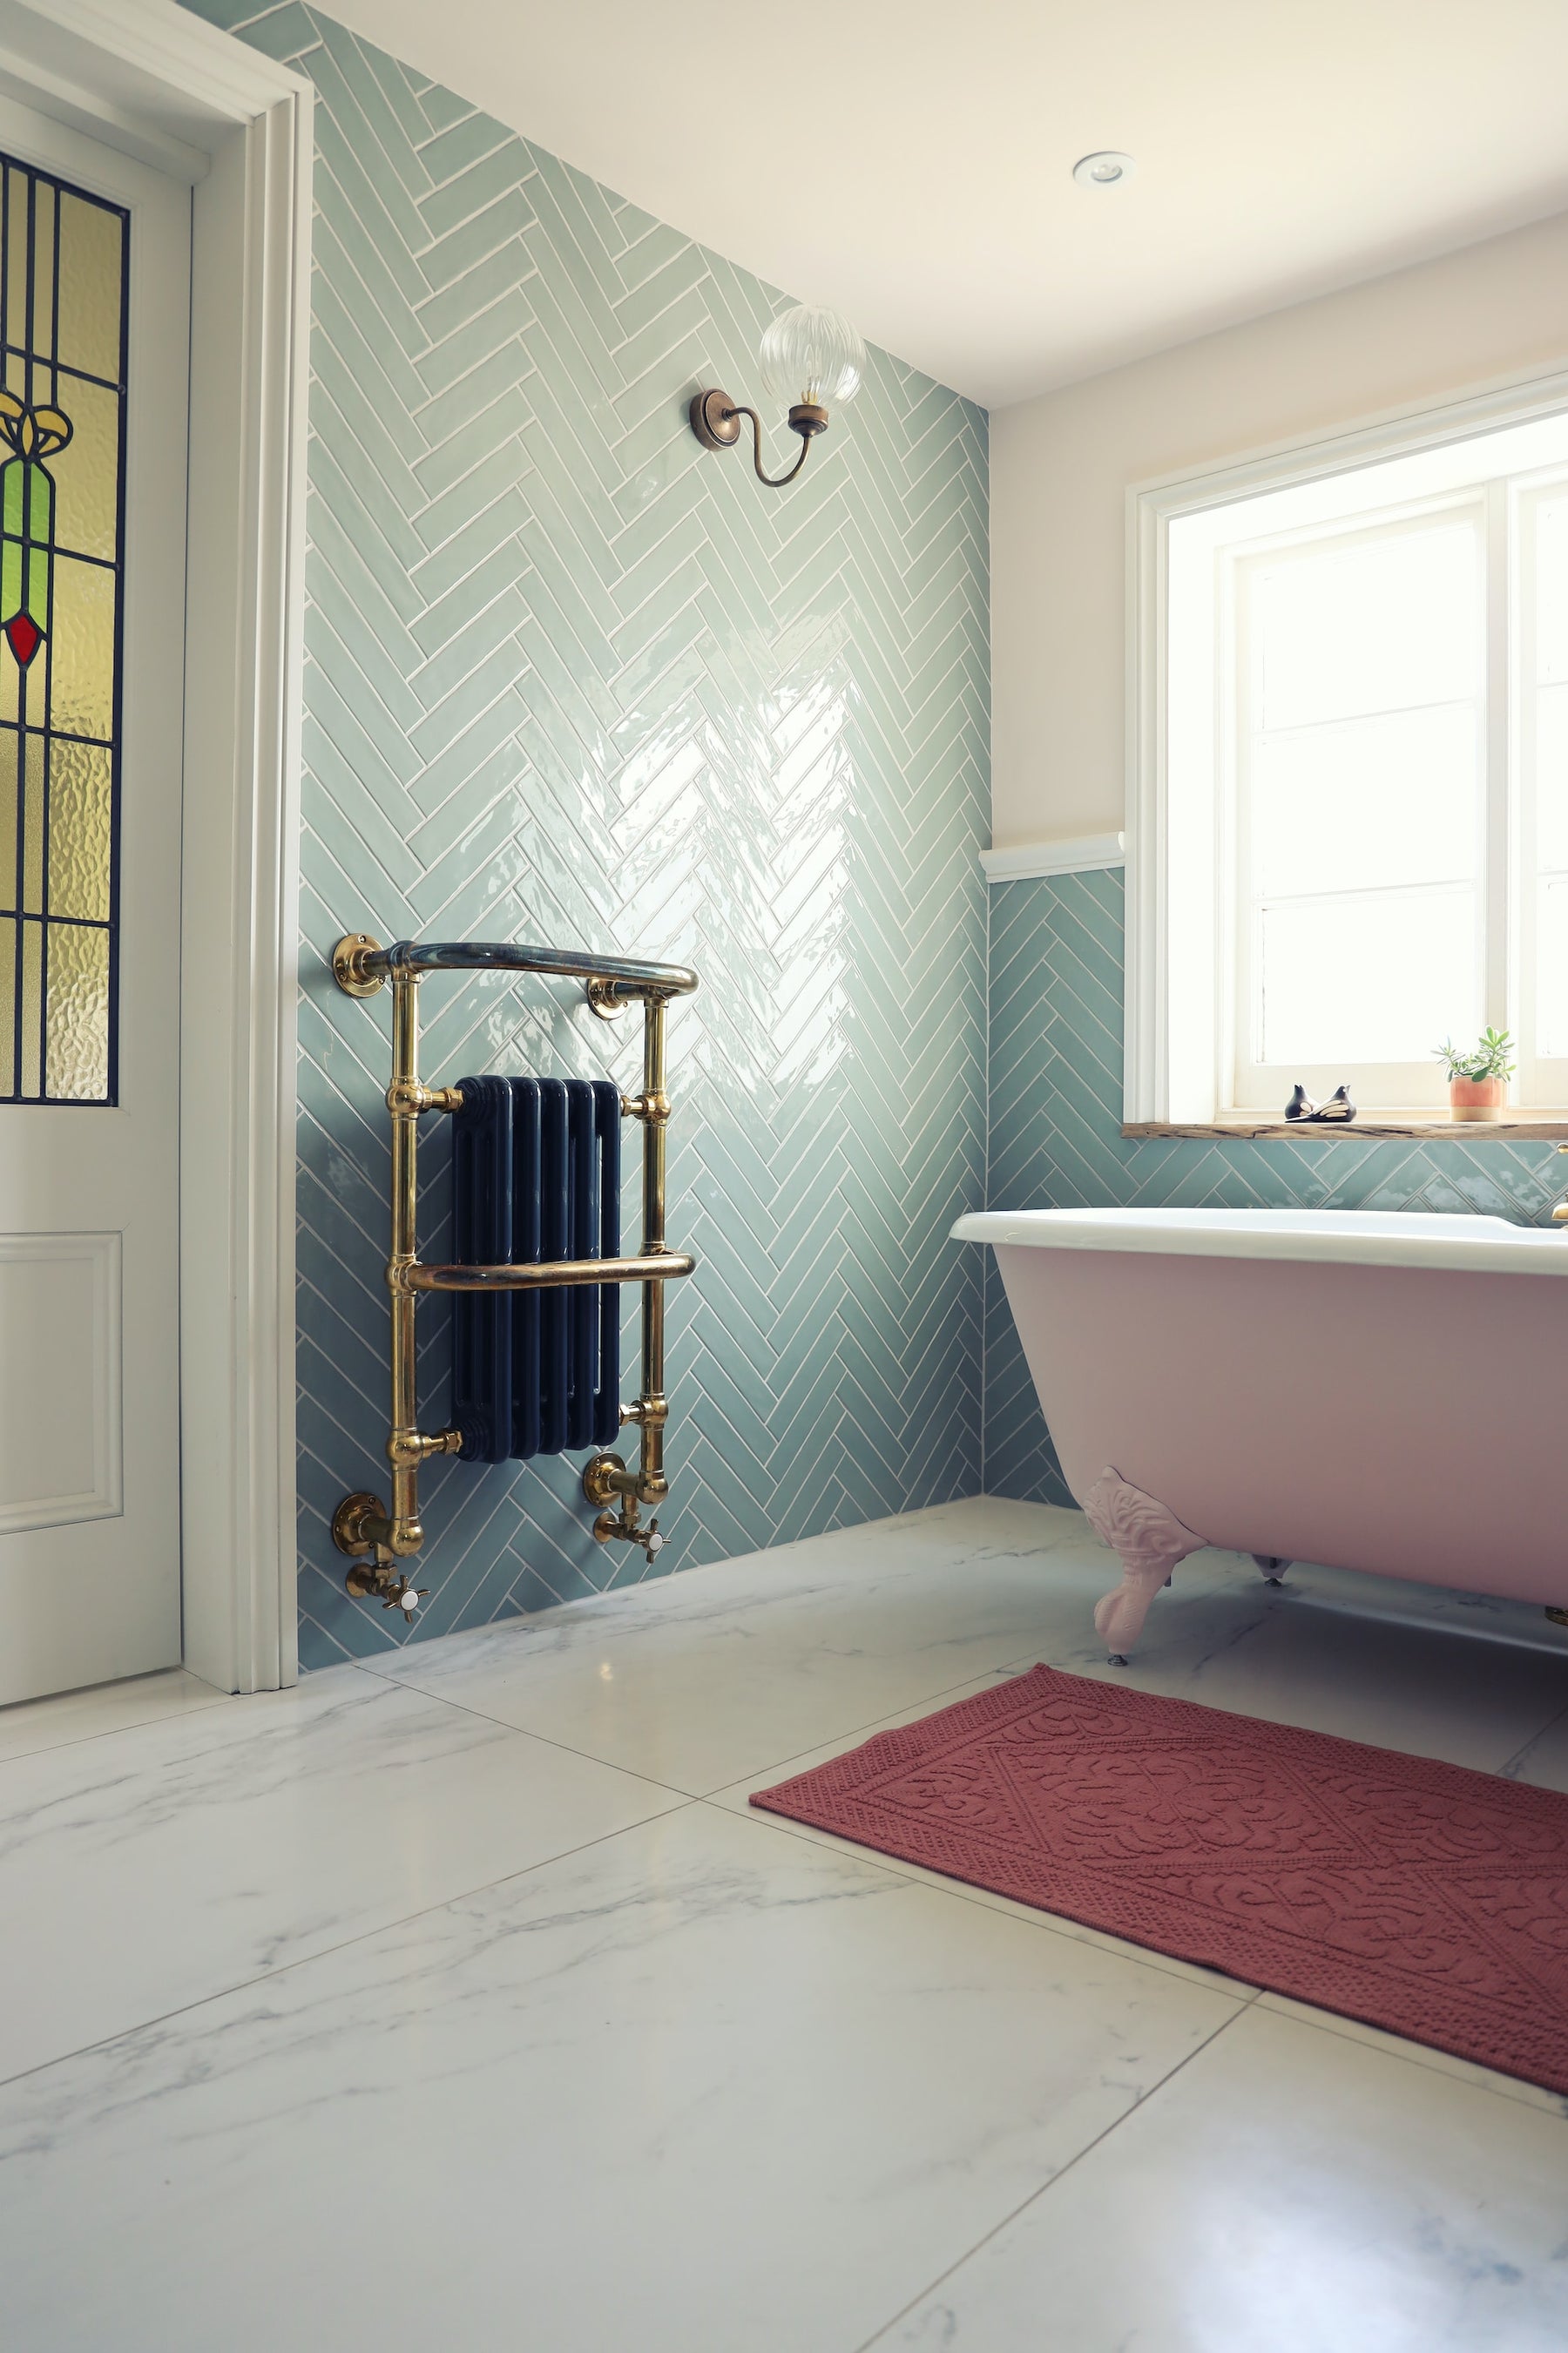 3 Small Steps to a Beautiful Bathroom: Modern Ideas for Your Bathroom Renovation